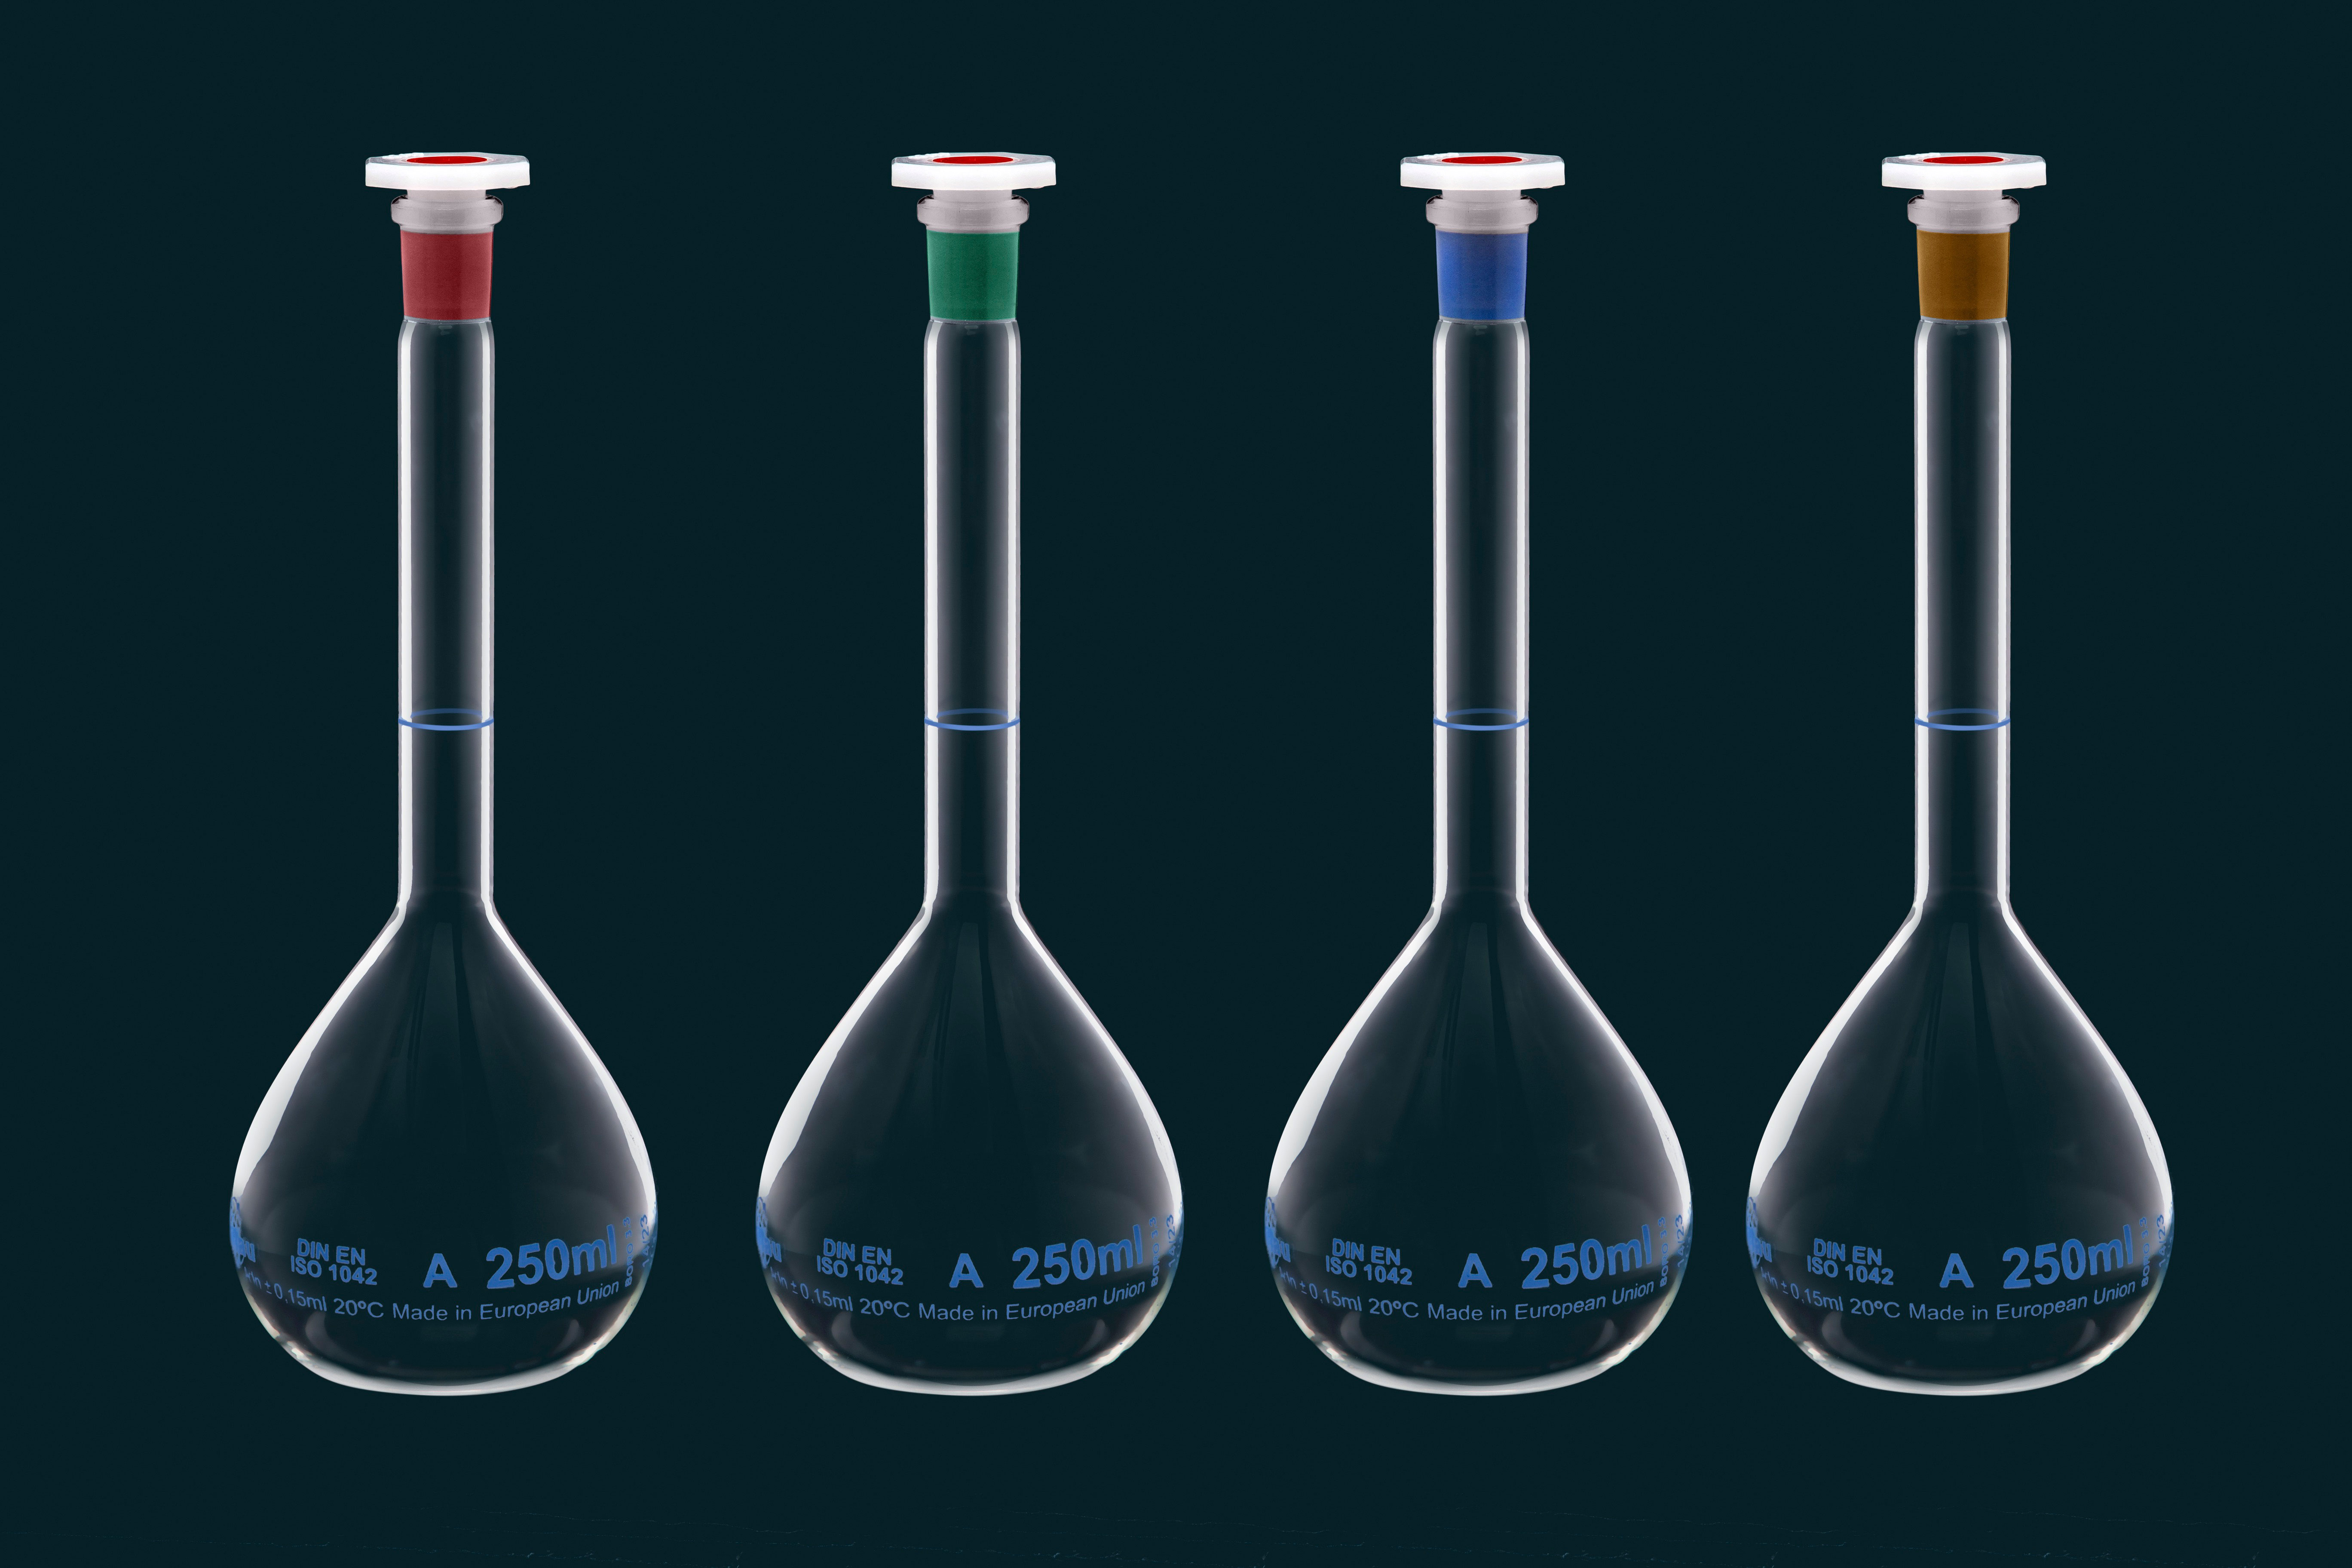 Volumetric flask with yellow neck, class A, 500ml, with PE stopper, lot number and certificate of conformity